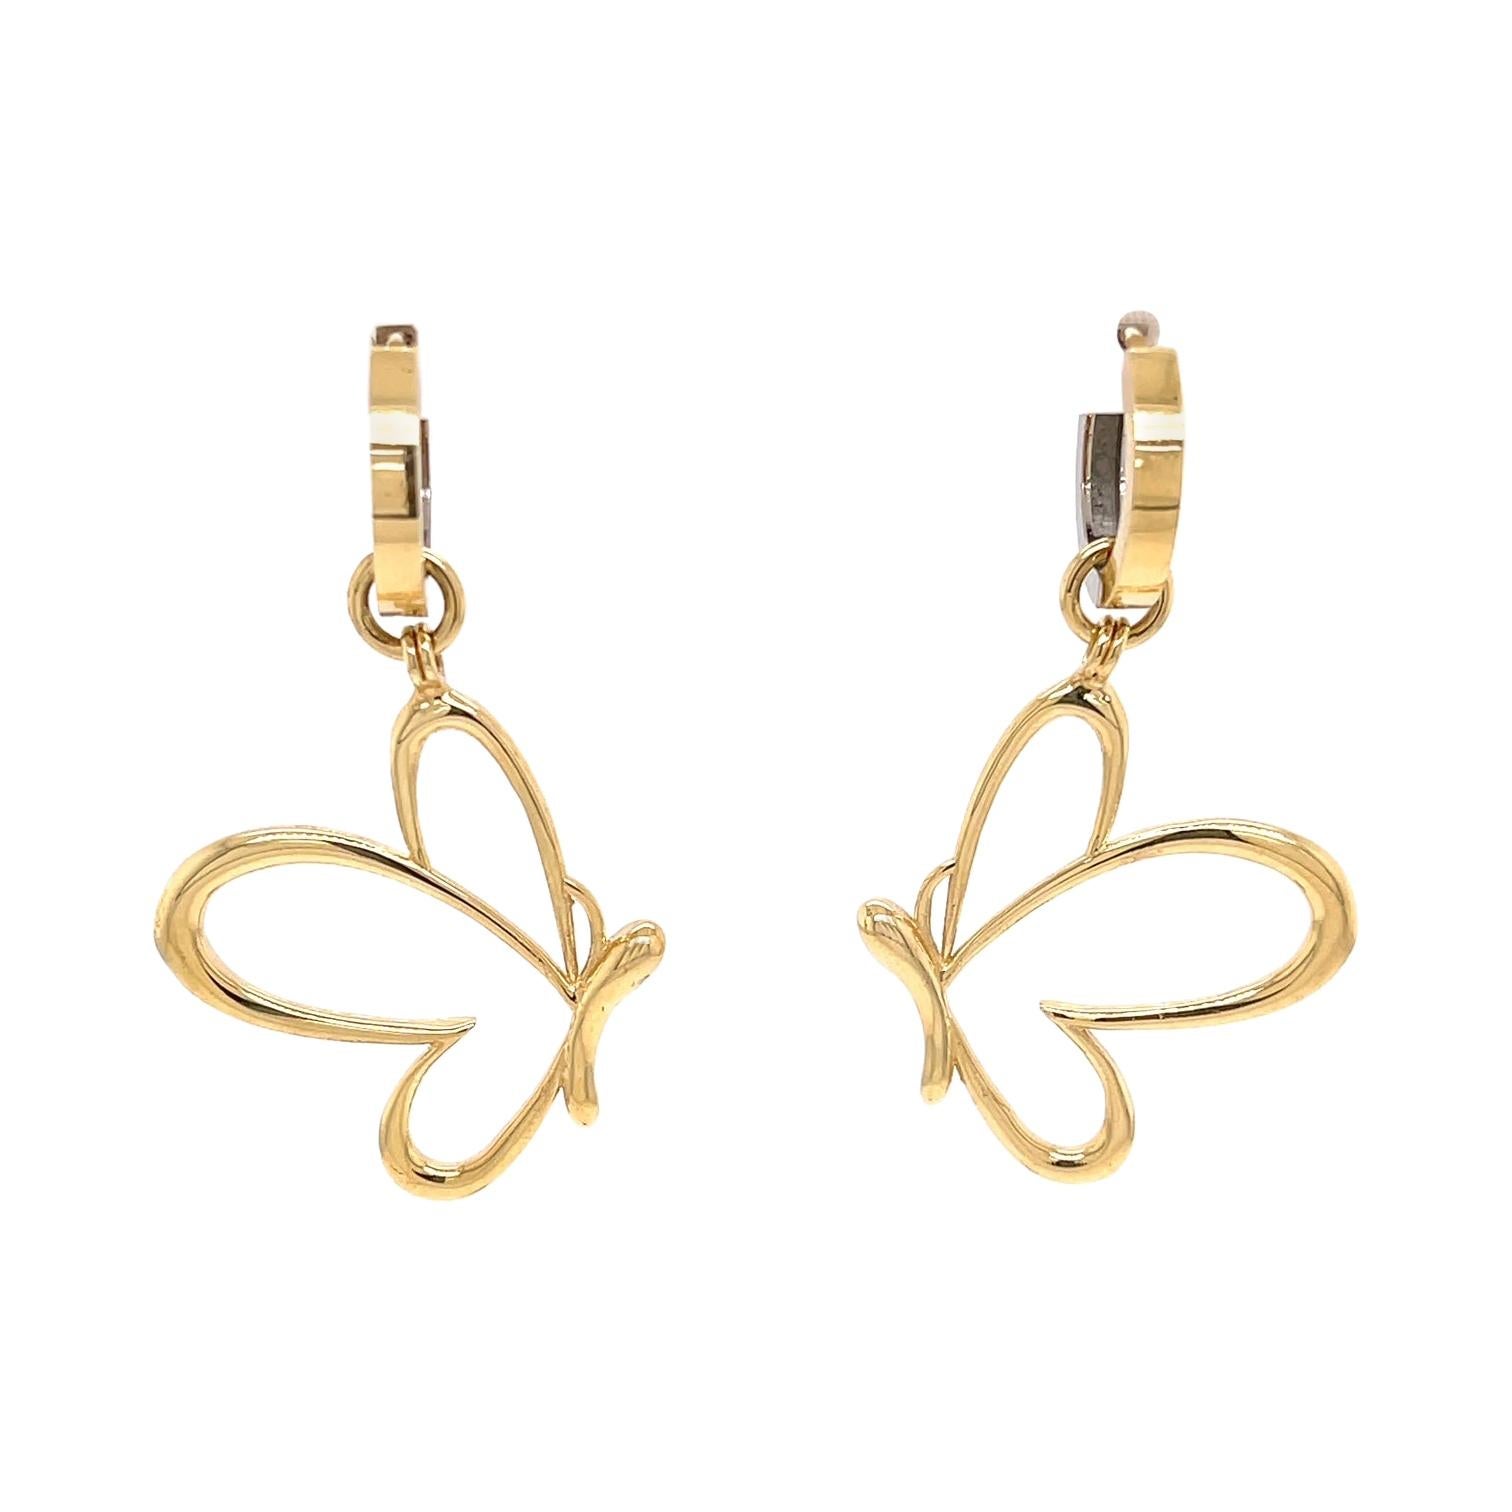 18k Yellow & White Gold Reversible Hoops with 18k Yellow Gold Butterfly Jackets